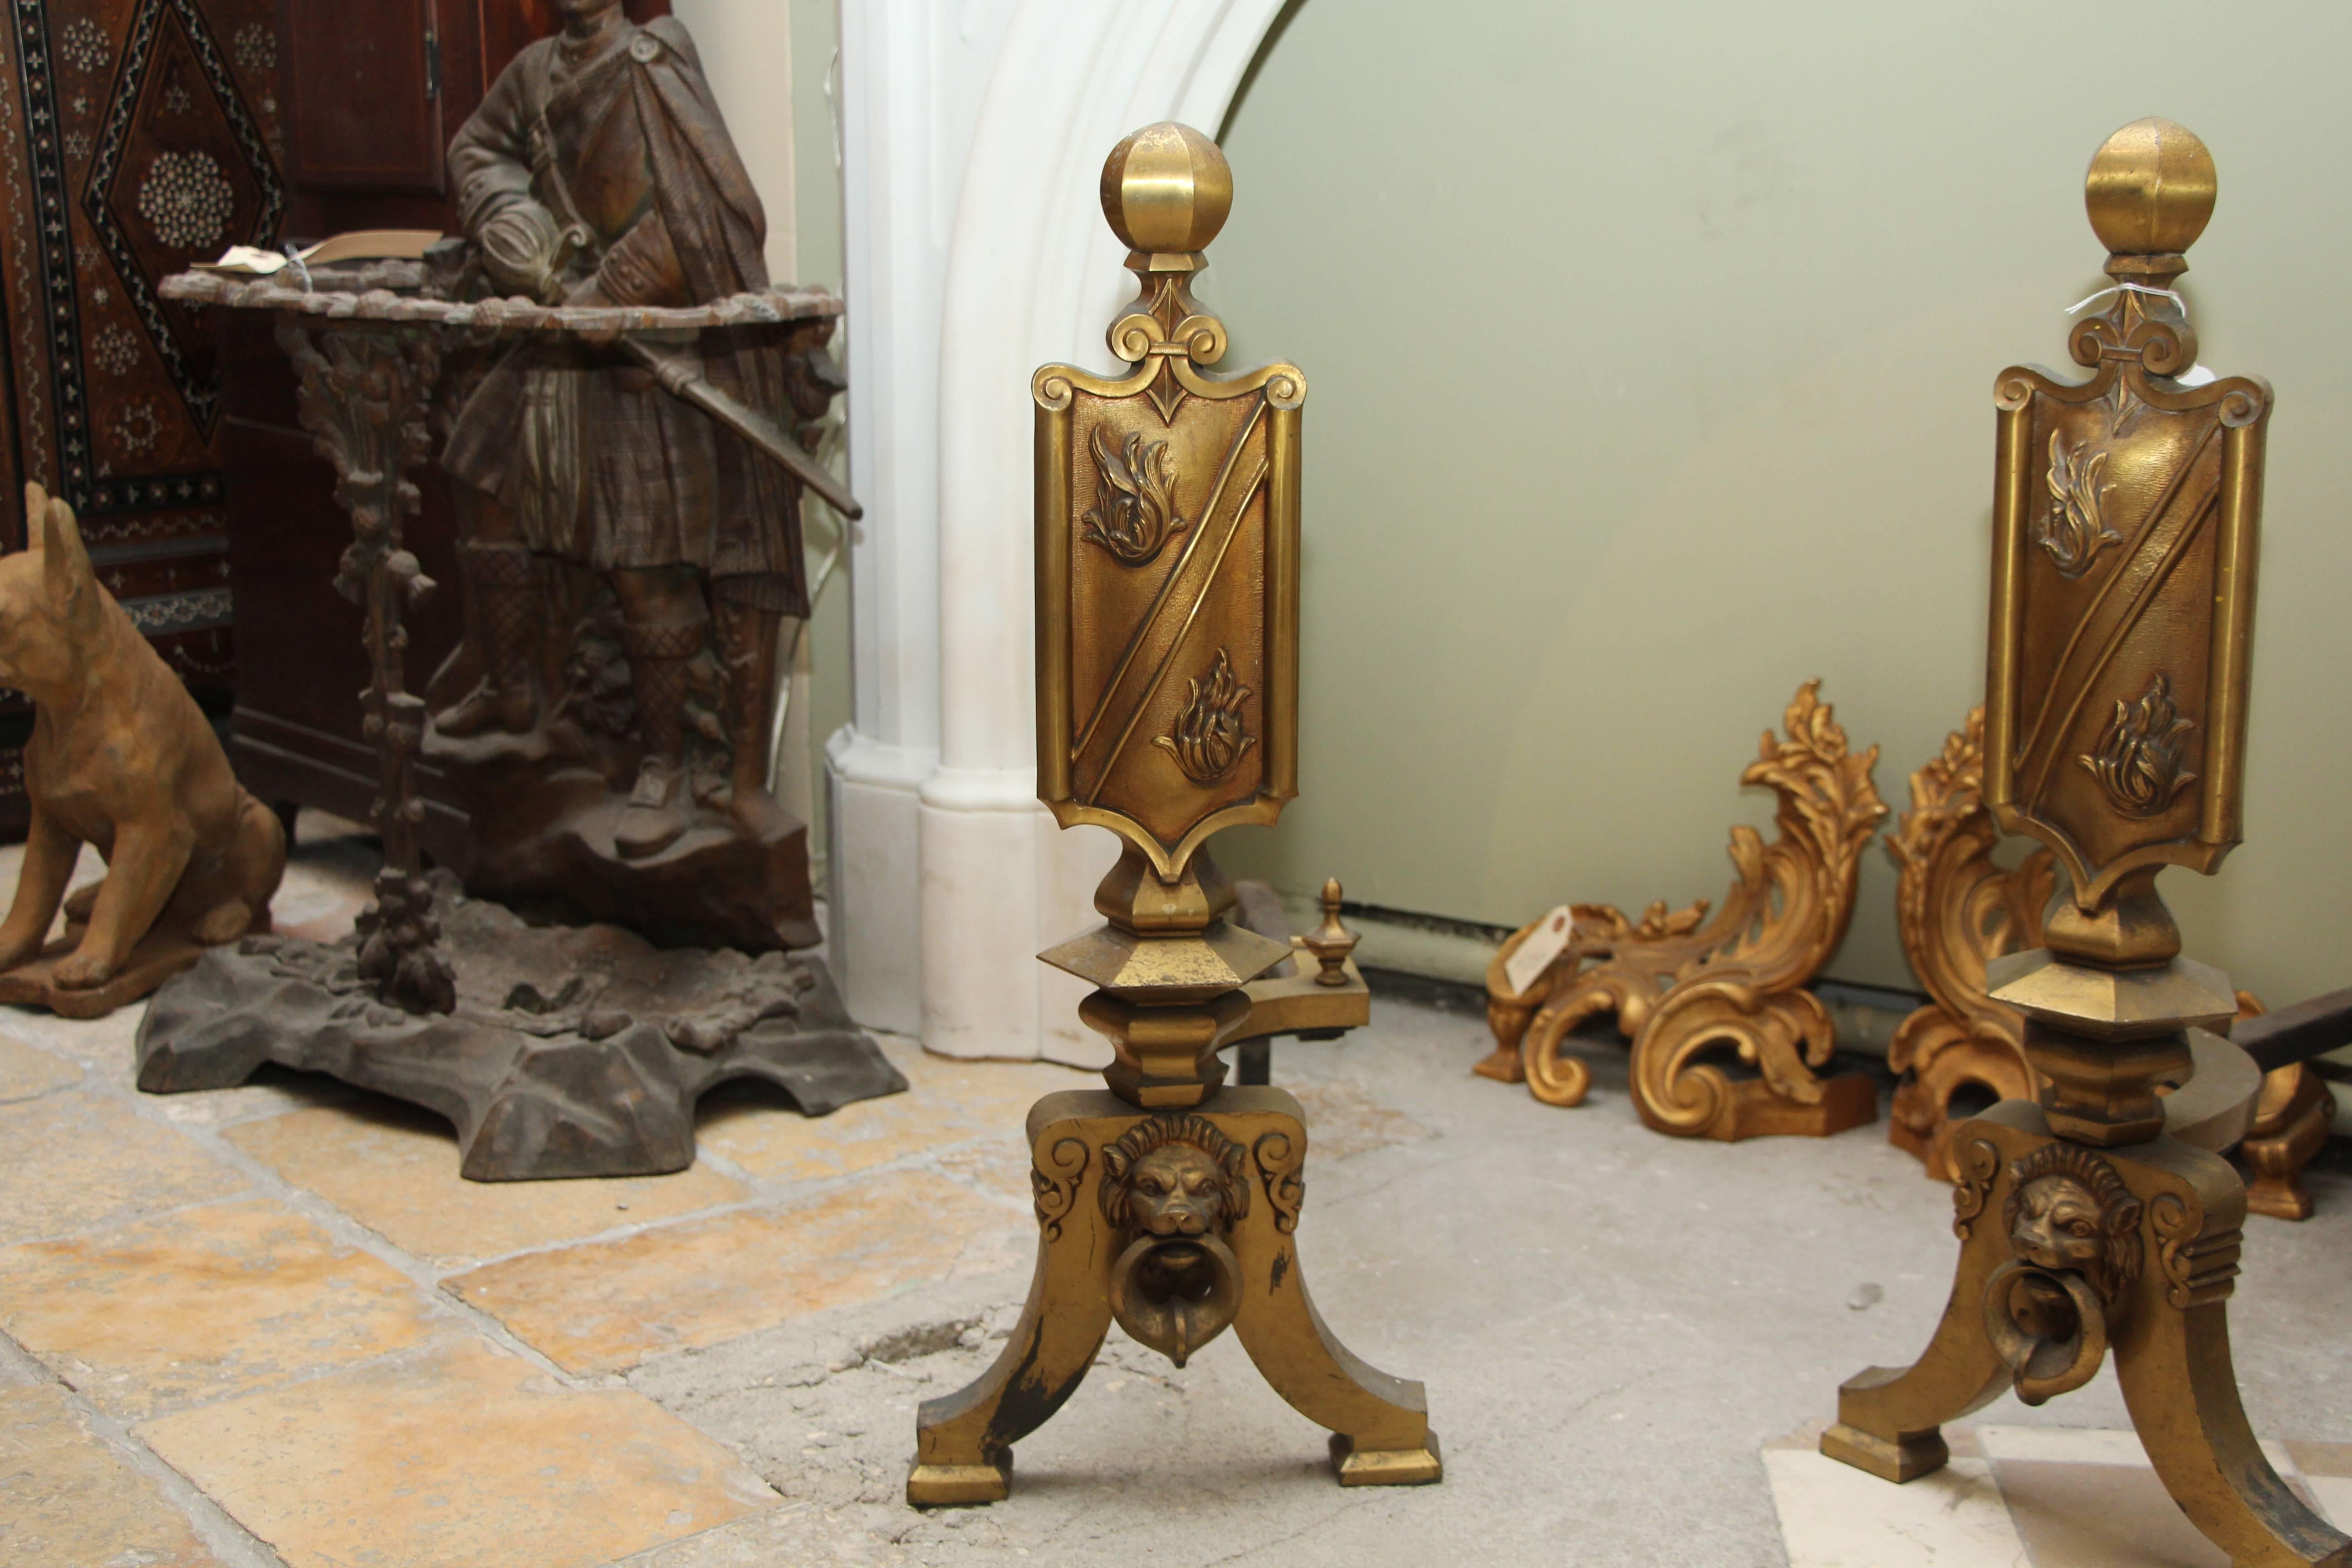 1920s French figural andirons with shield and lion head detail in gilded bronze. Priced as a pair. These can be viewed at our 5 East 16th St, Union Square location in Manhattan.